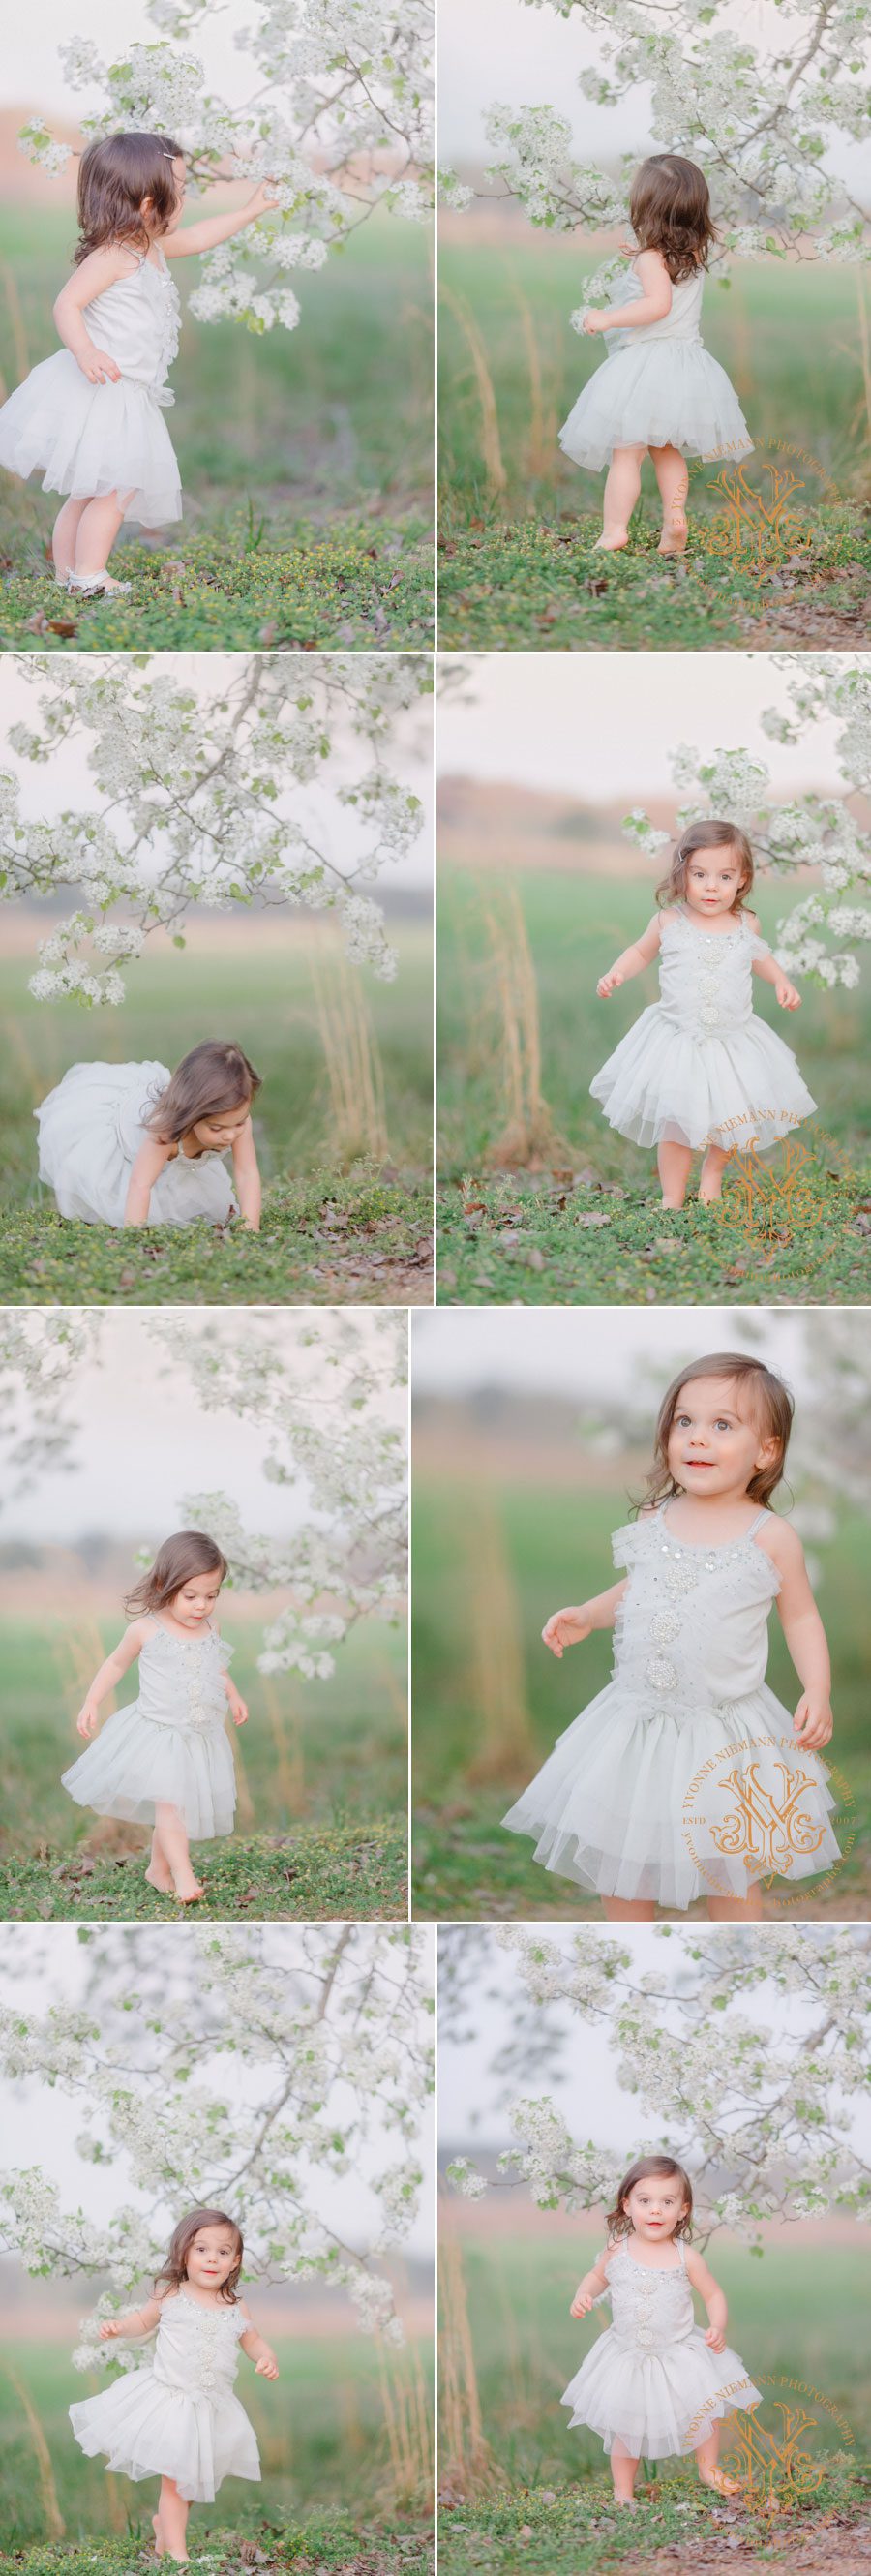 Fine art children's photography in Oconee County of a two year old girl among blossoming pear trees wearing Tutu Du Monde dress.